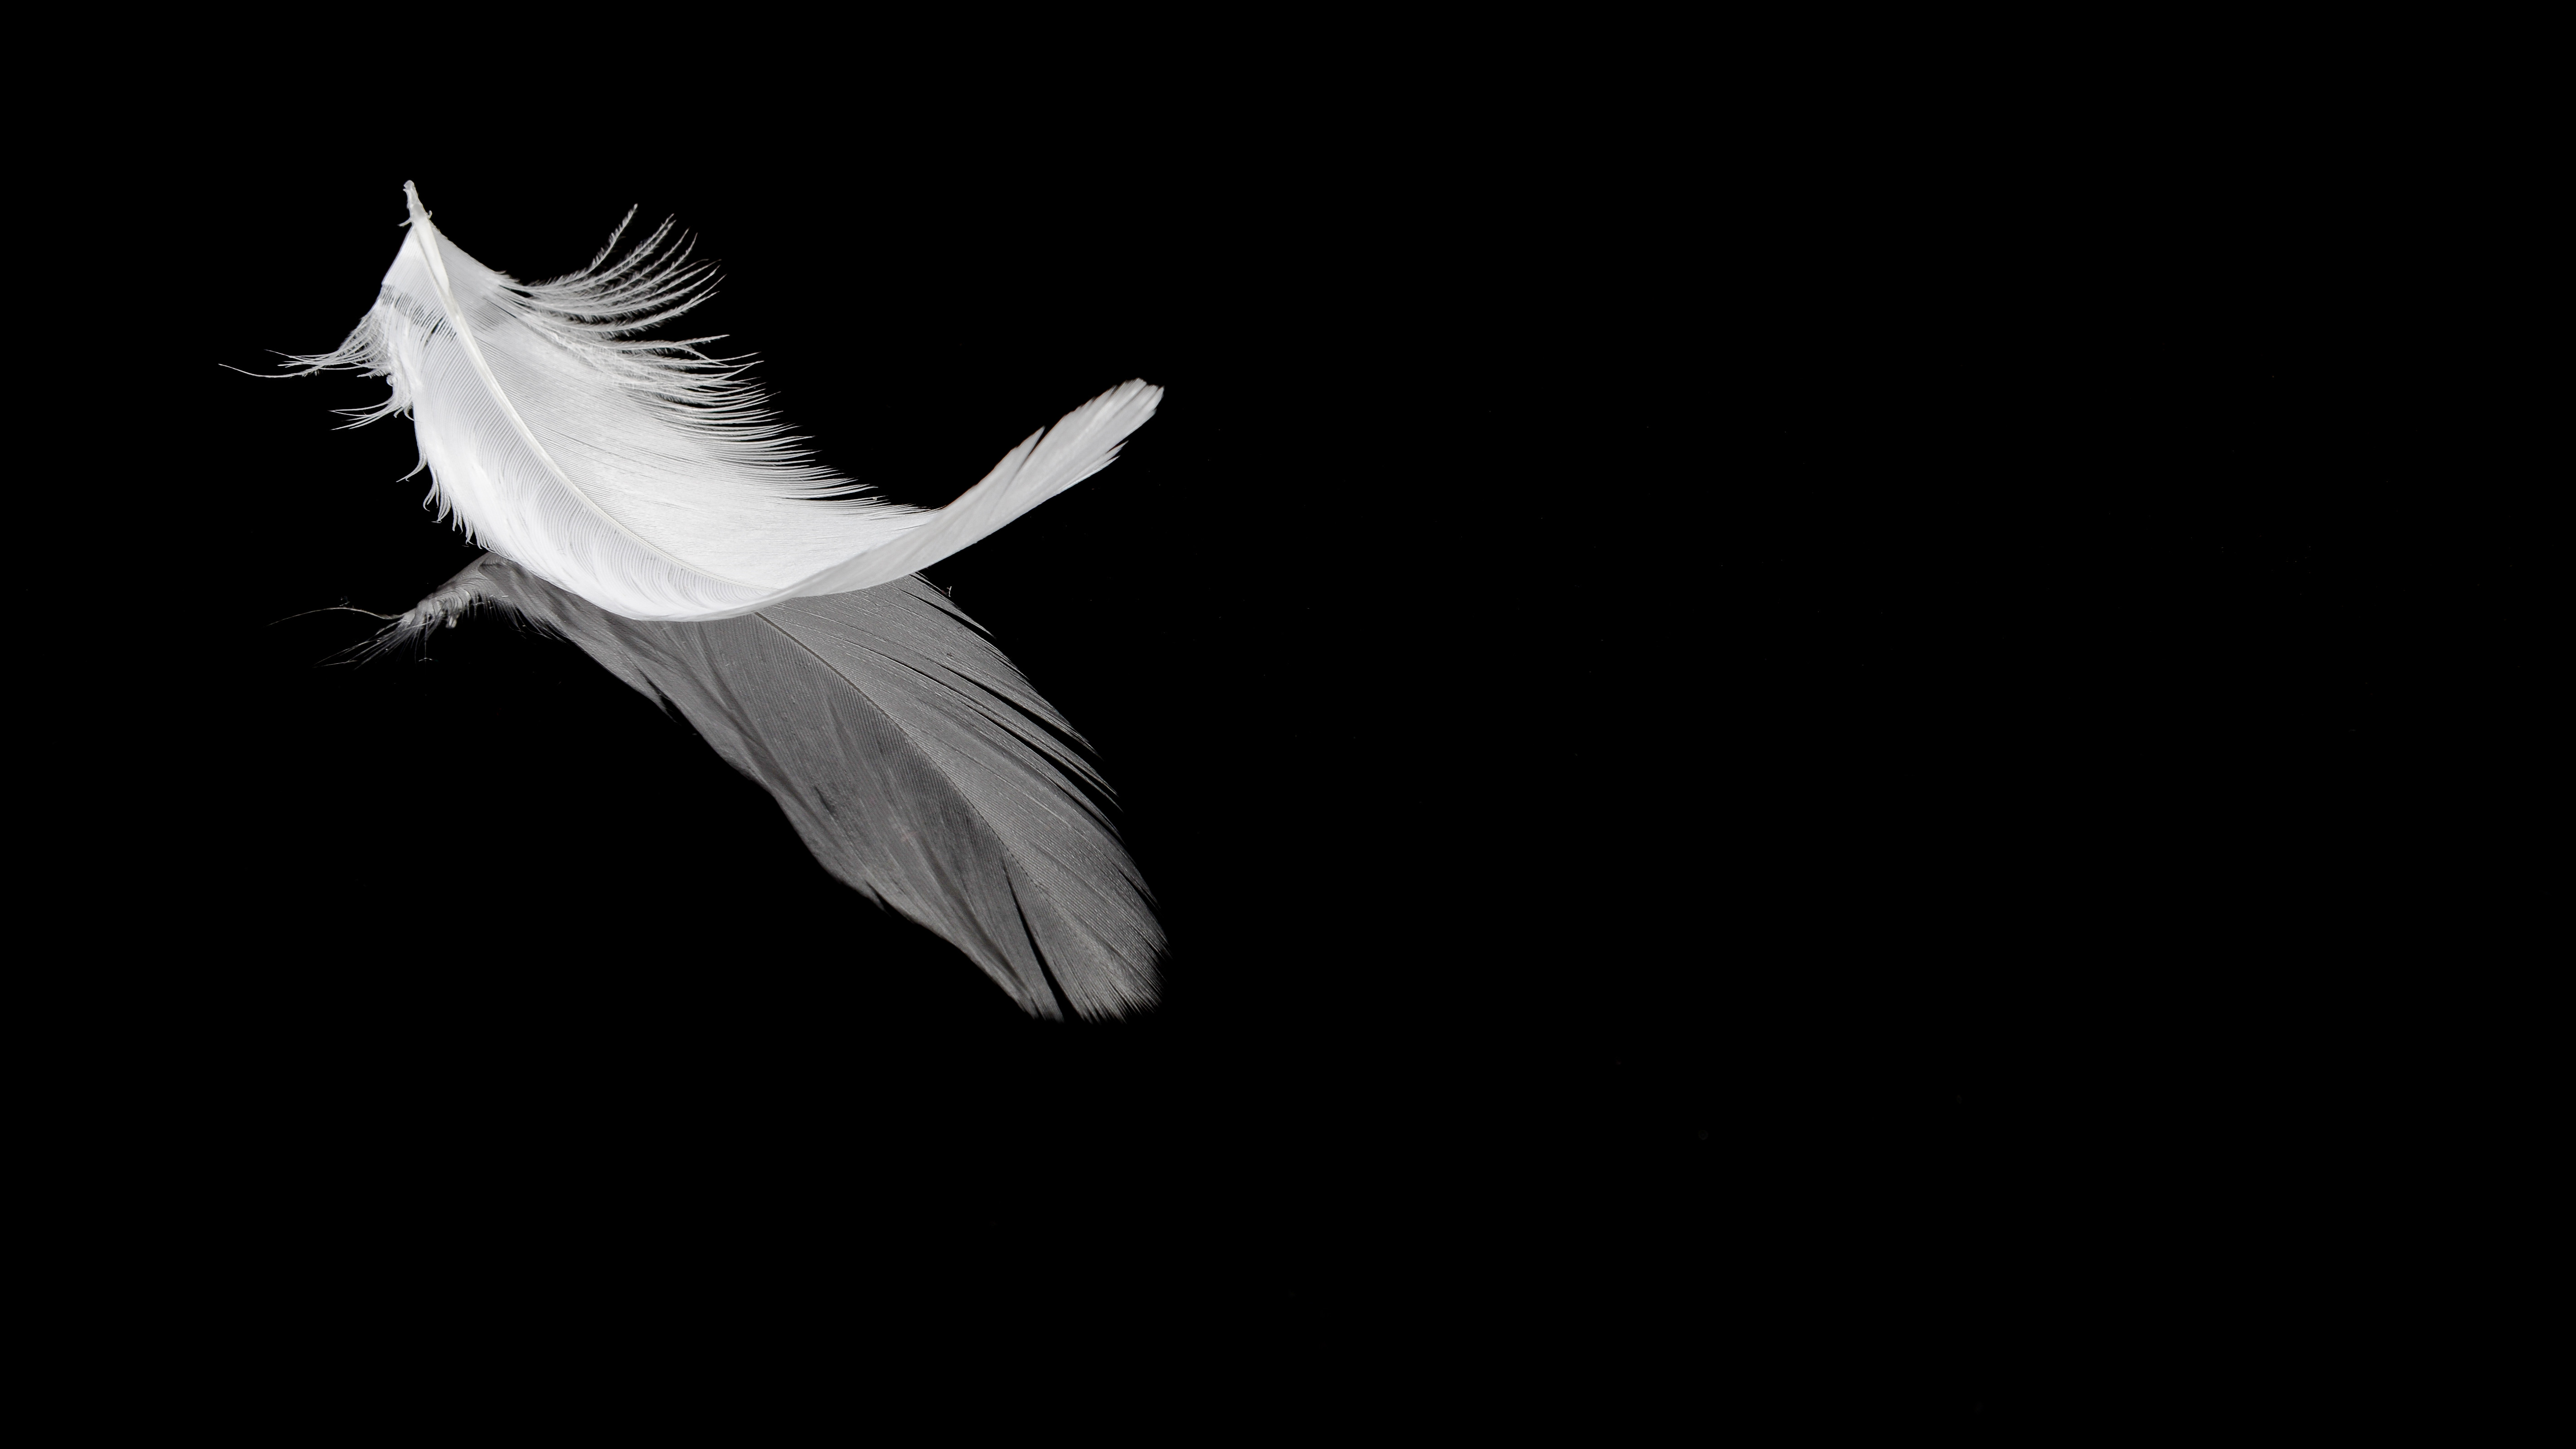 reflection, black, feather, bw, chb, pen cell phone wallpapers